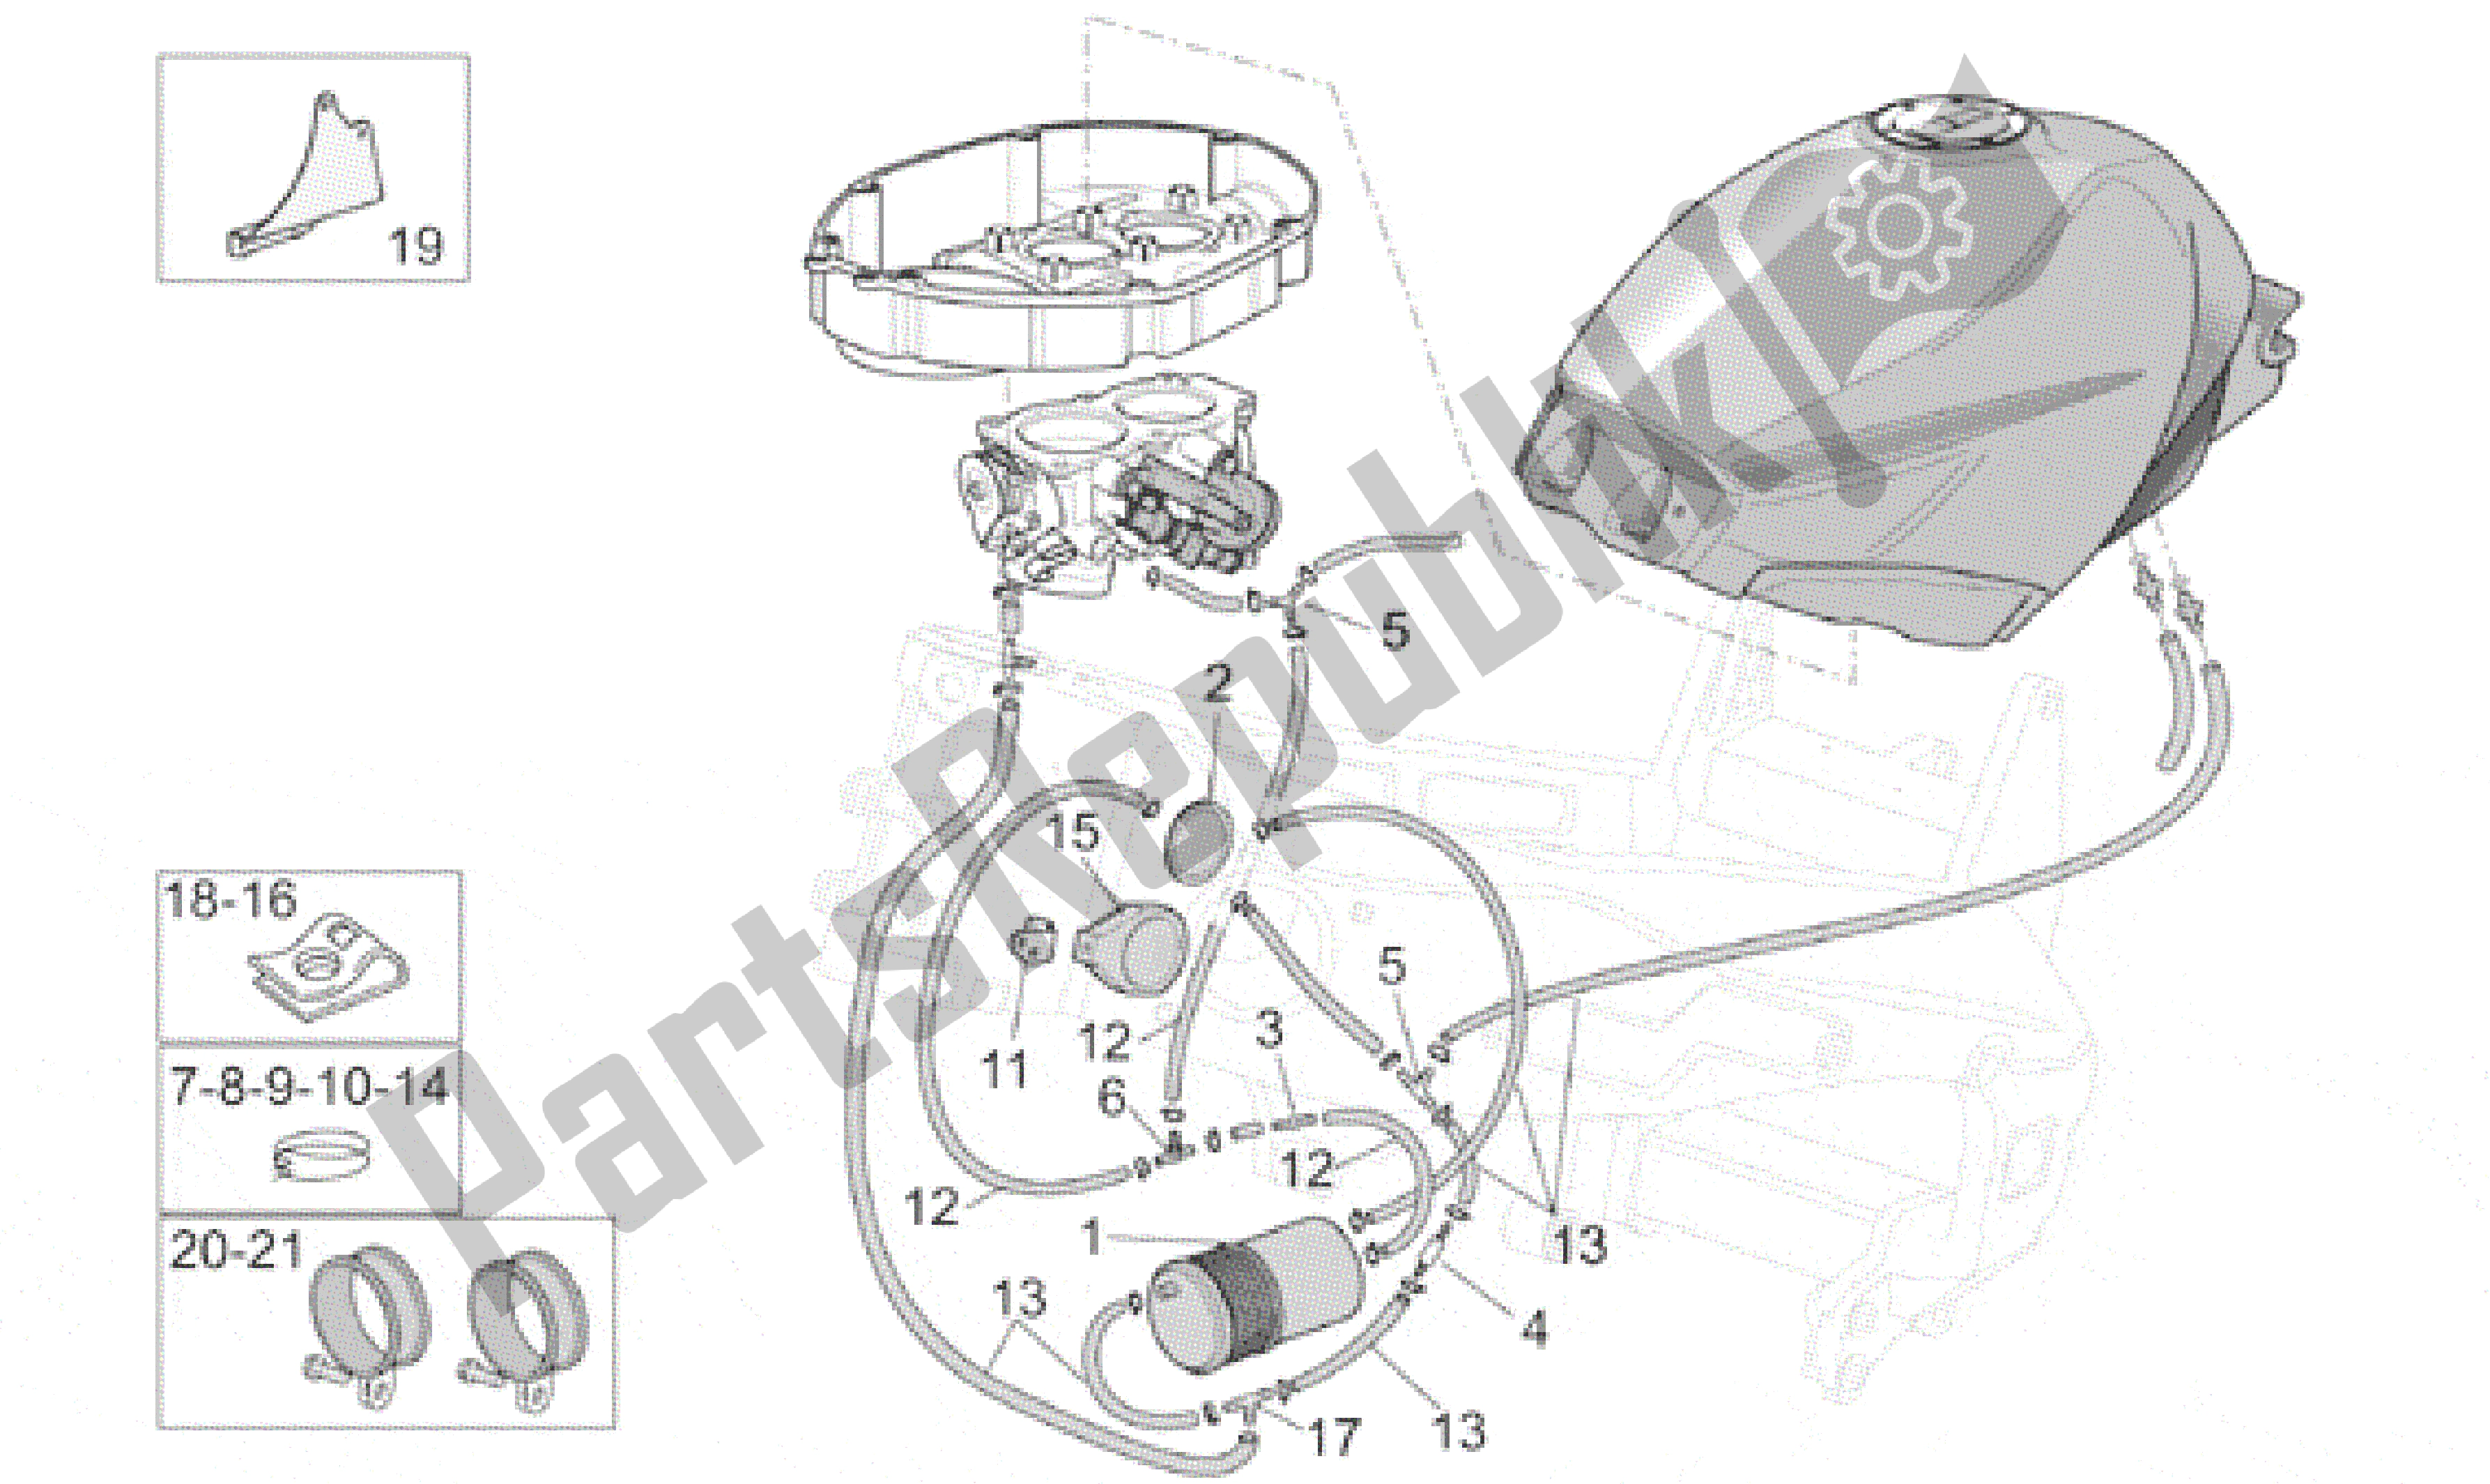 All parts for the Fuel Vapour Recover System of the Aprilia RST 1000 2001